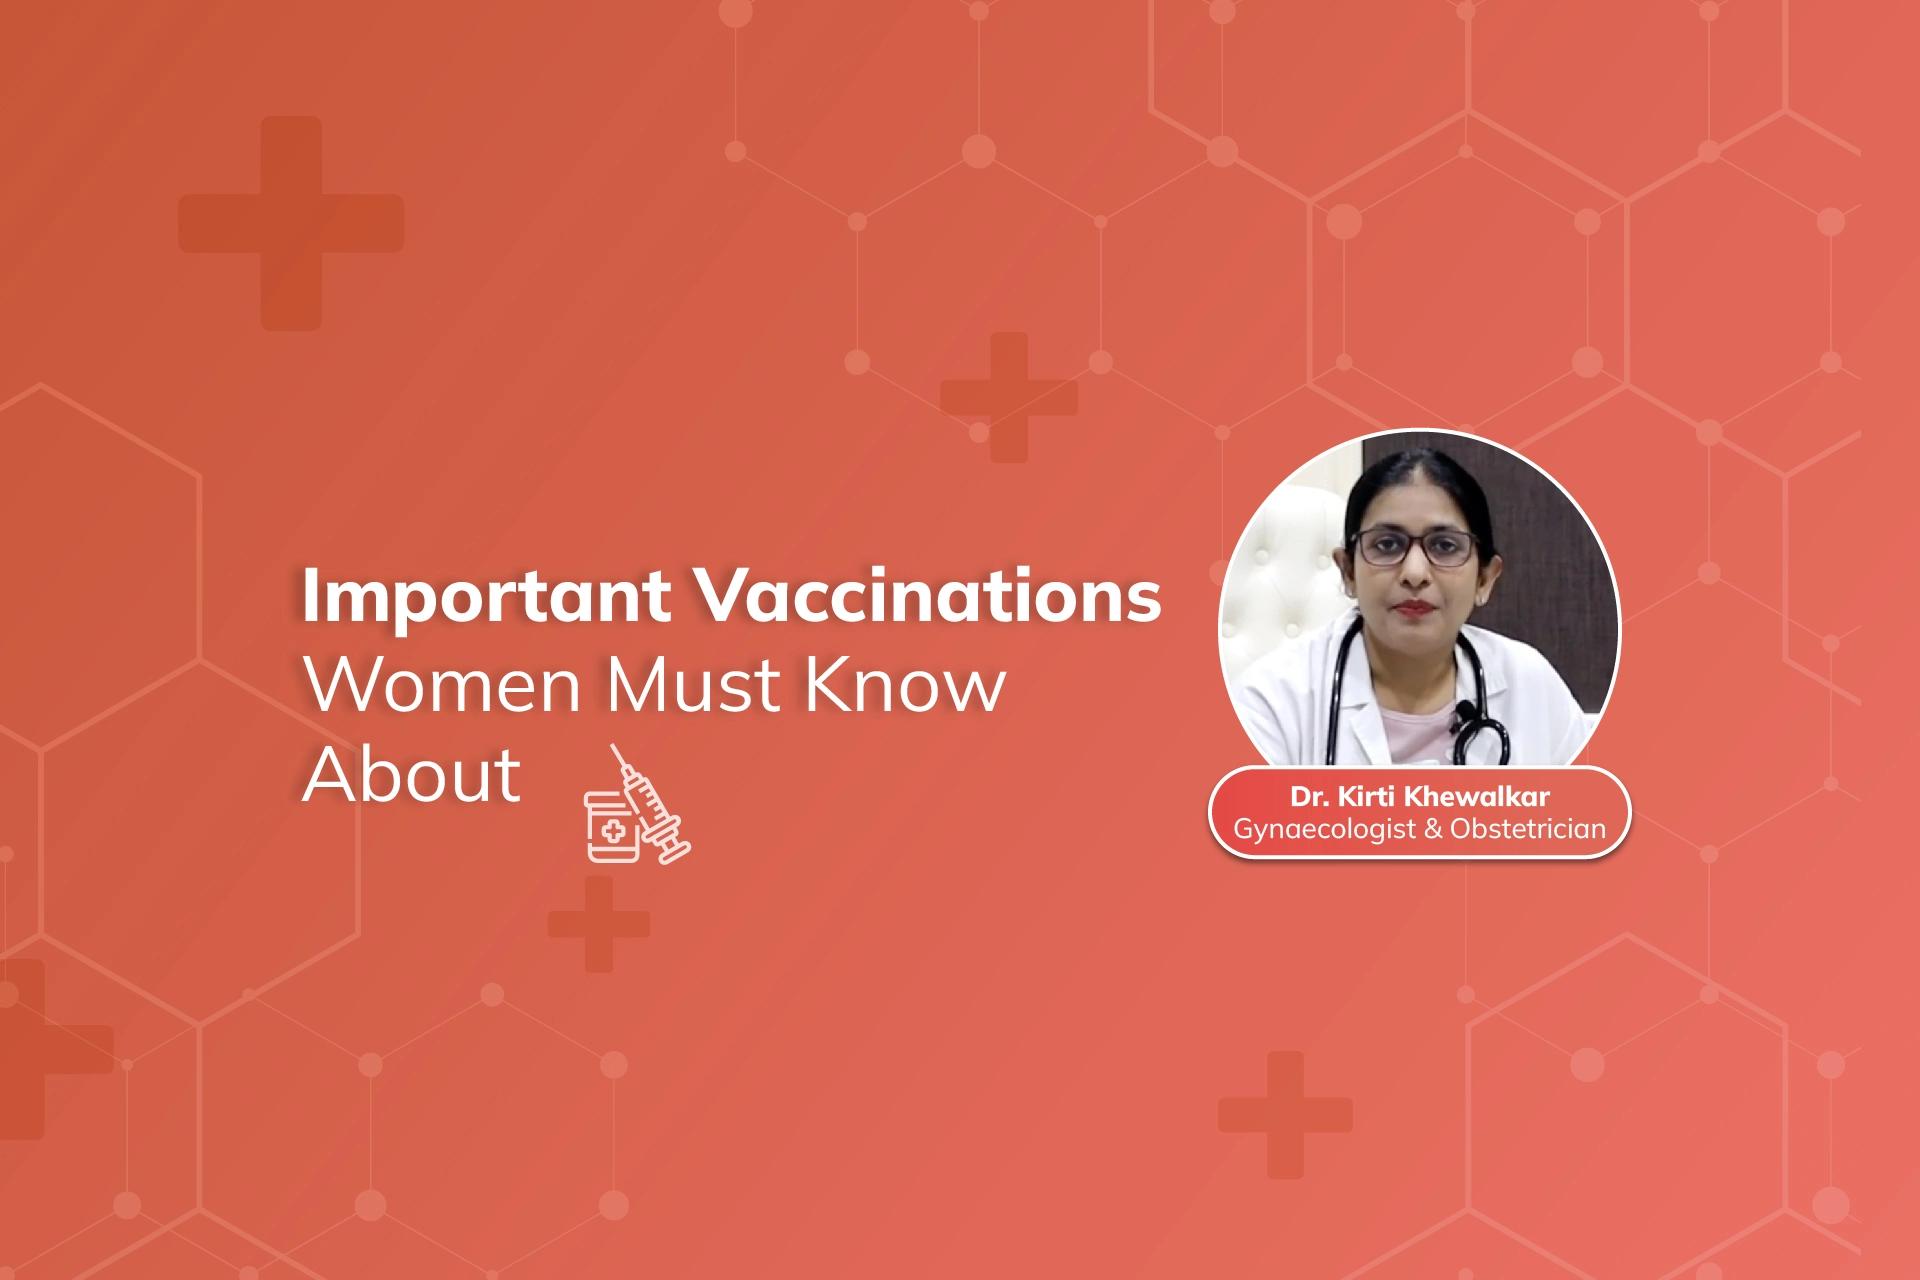 Important Vaccinations Women Must Know About by Dr. Kirti Khewalkar